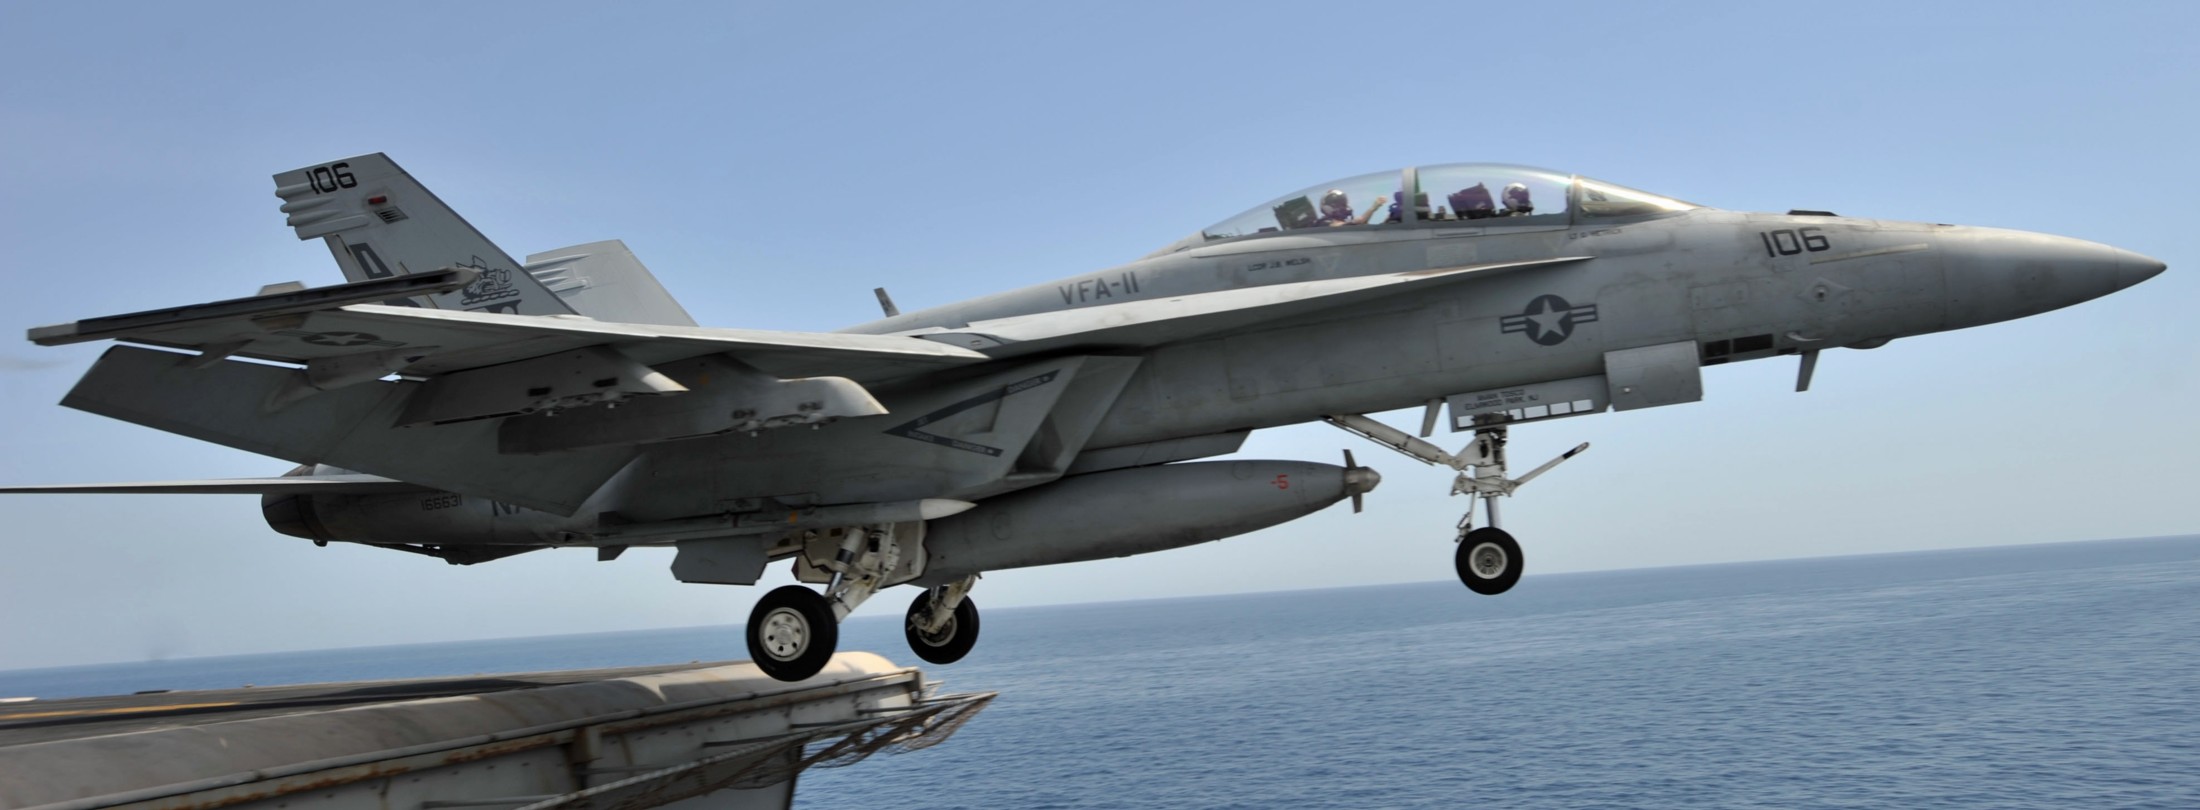 vfa-11 red rippers strike fighter squadron us navy f/a-18f super hornet carrier air wing cvw-1 uss enterprise cvn-65 41